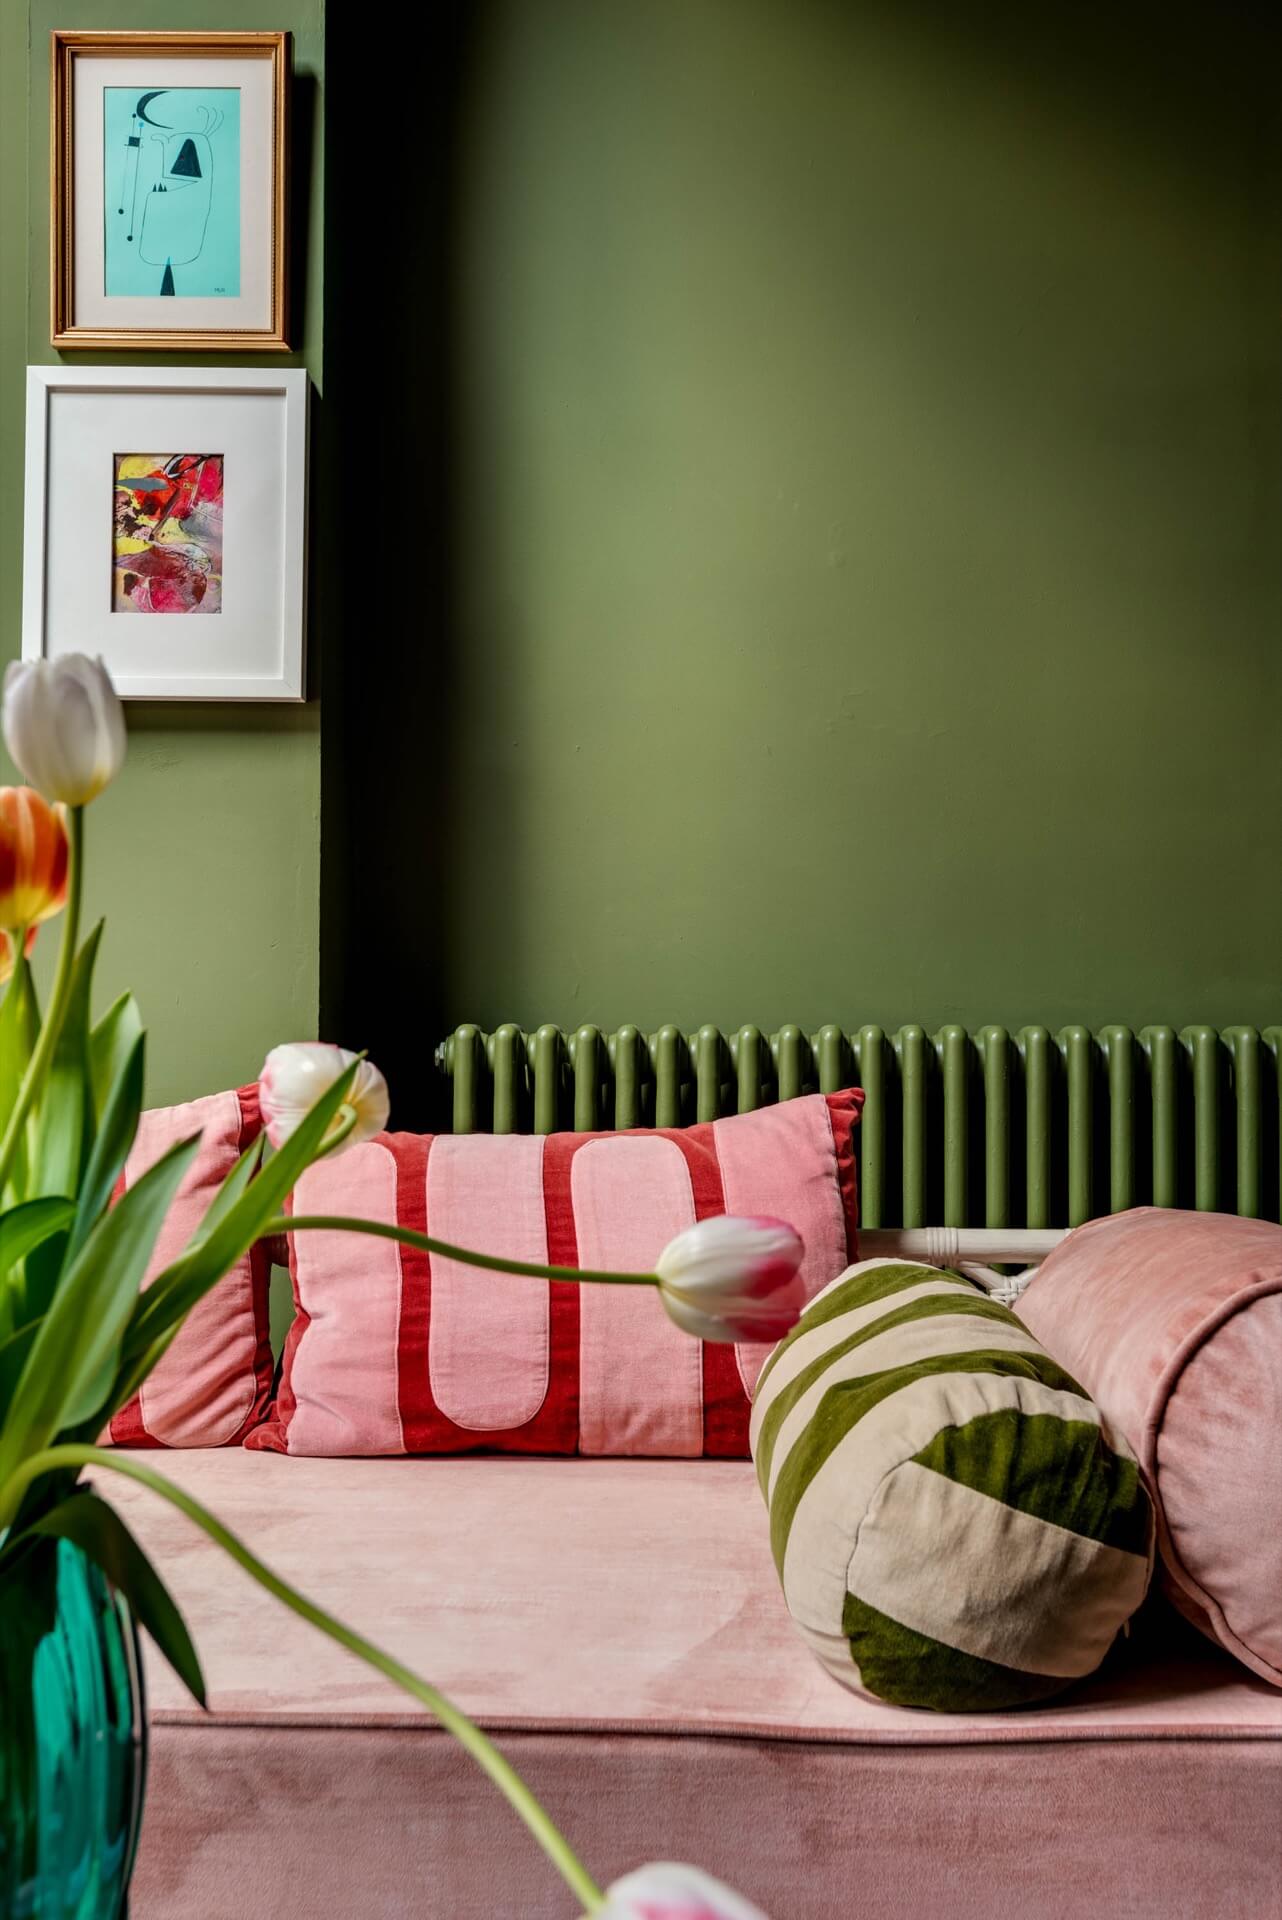 Corner of a green sitting room with colourful cushions